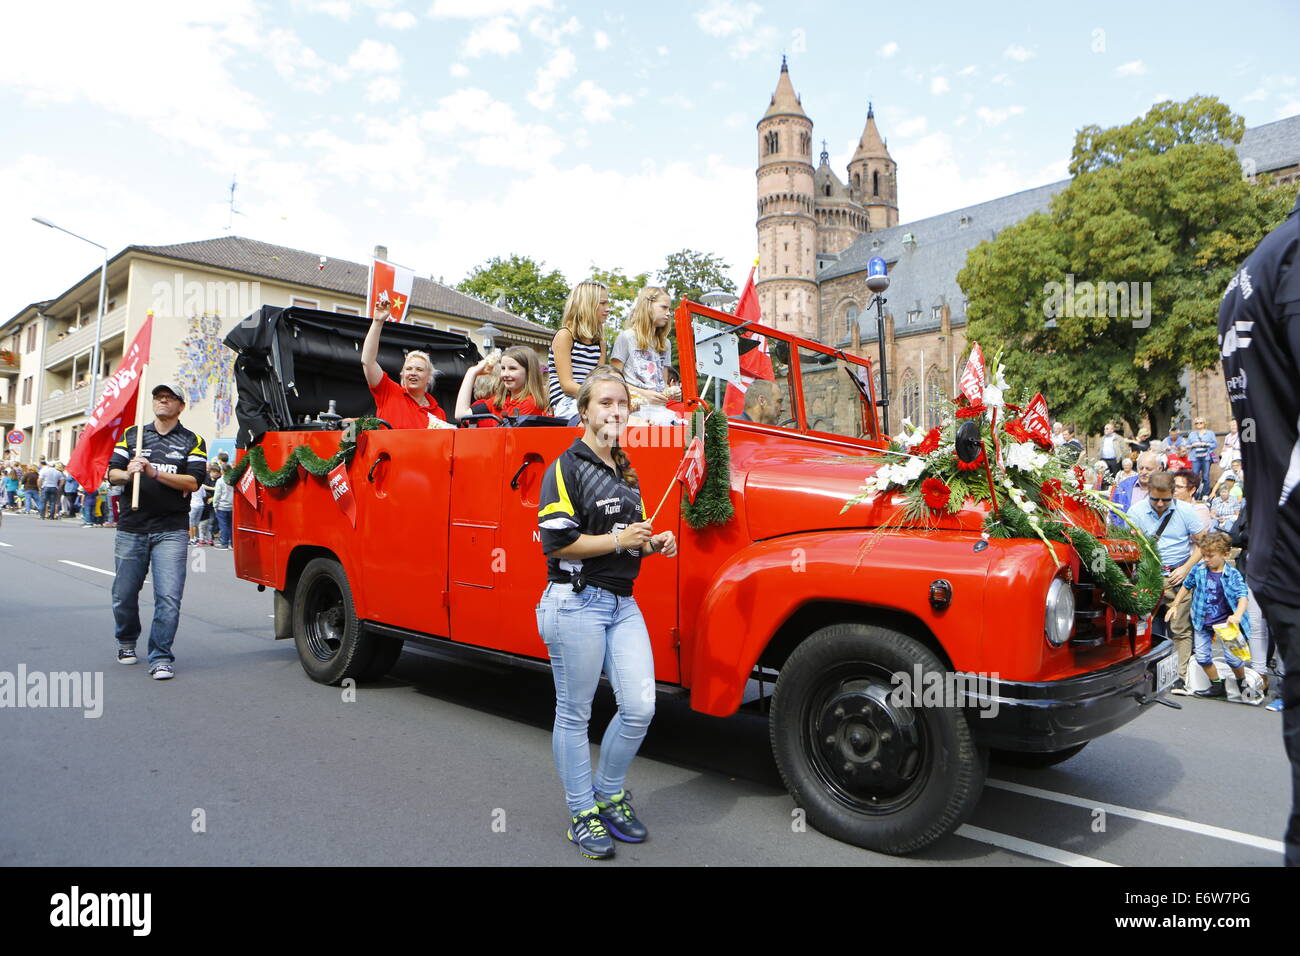 Worms, Germany. 31st Aug, 2014. An historical fire truck is pictured in the Backfischfest parade 2014. The cathedral of Worms can be seen in the background. The first highlight of this year's Backfischfest was the big parade through the city of Worms with 125 groups and floats. Community groups, sport clubs, music groups and business from Worms and further afield took part. © Michael Debets/Pacific Press/Alamy Live News Stock Photo